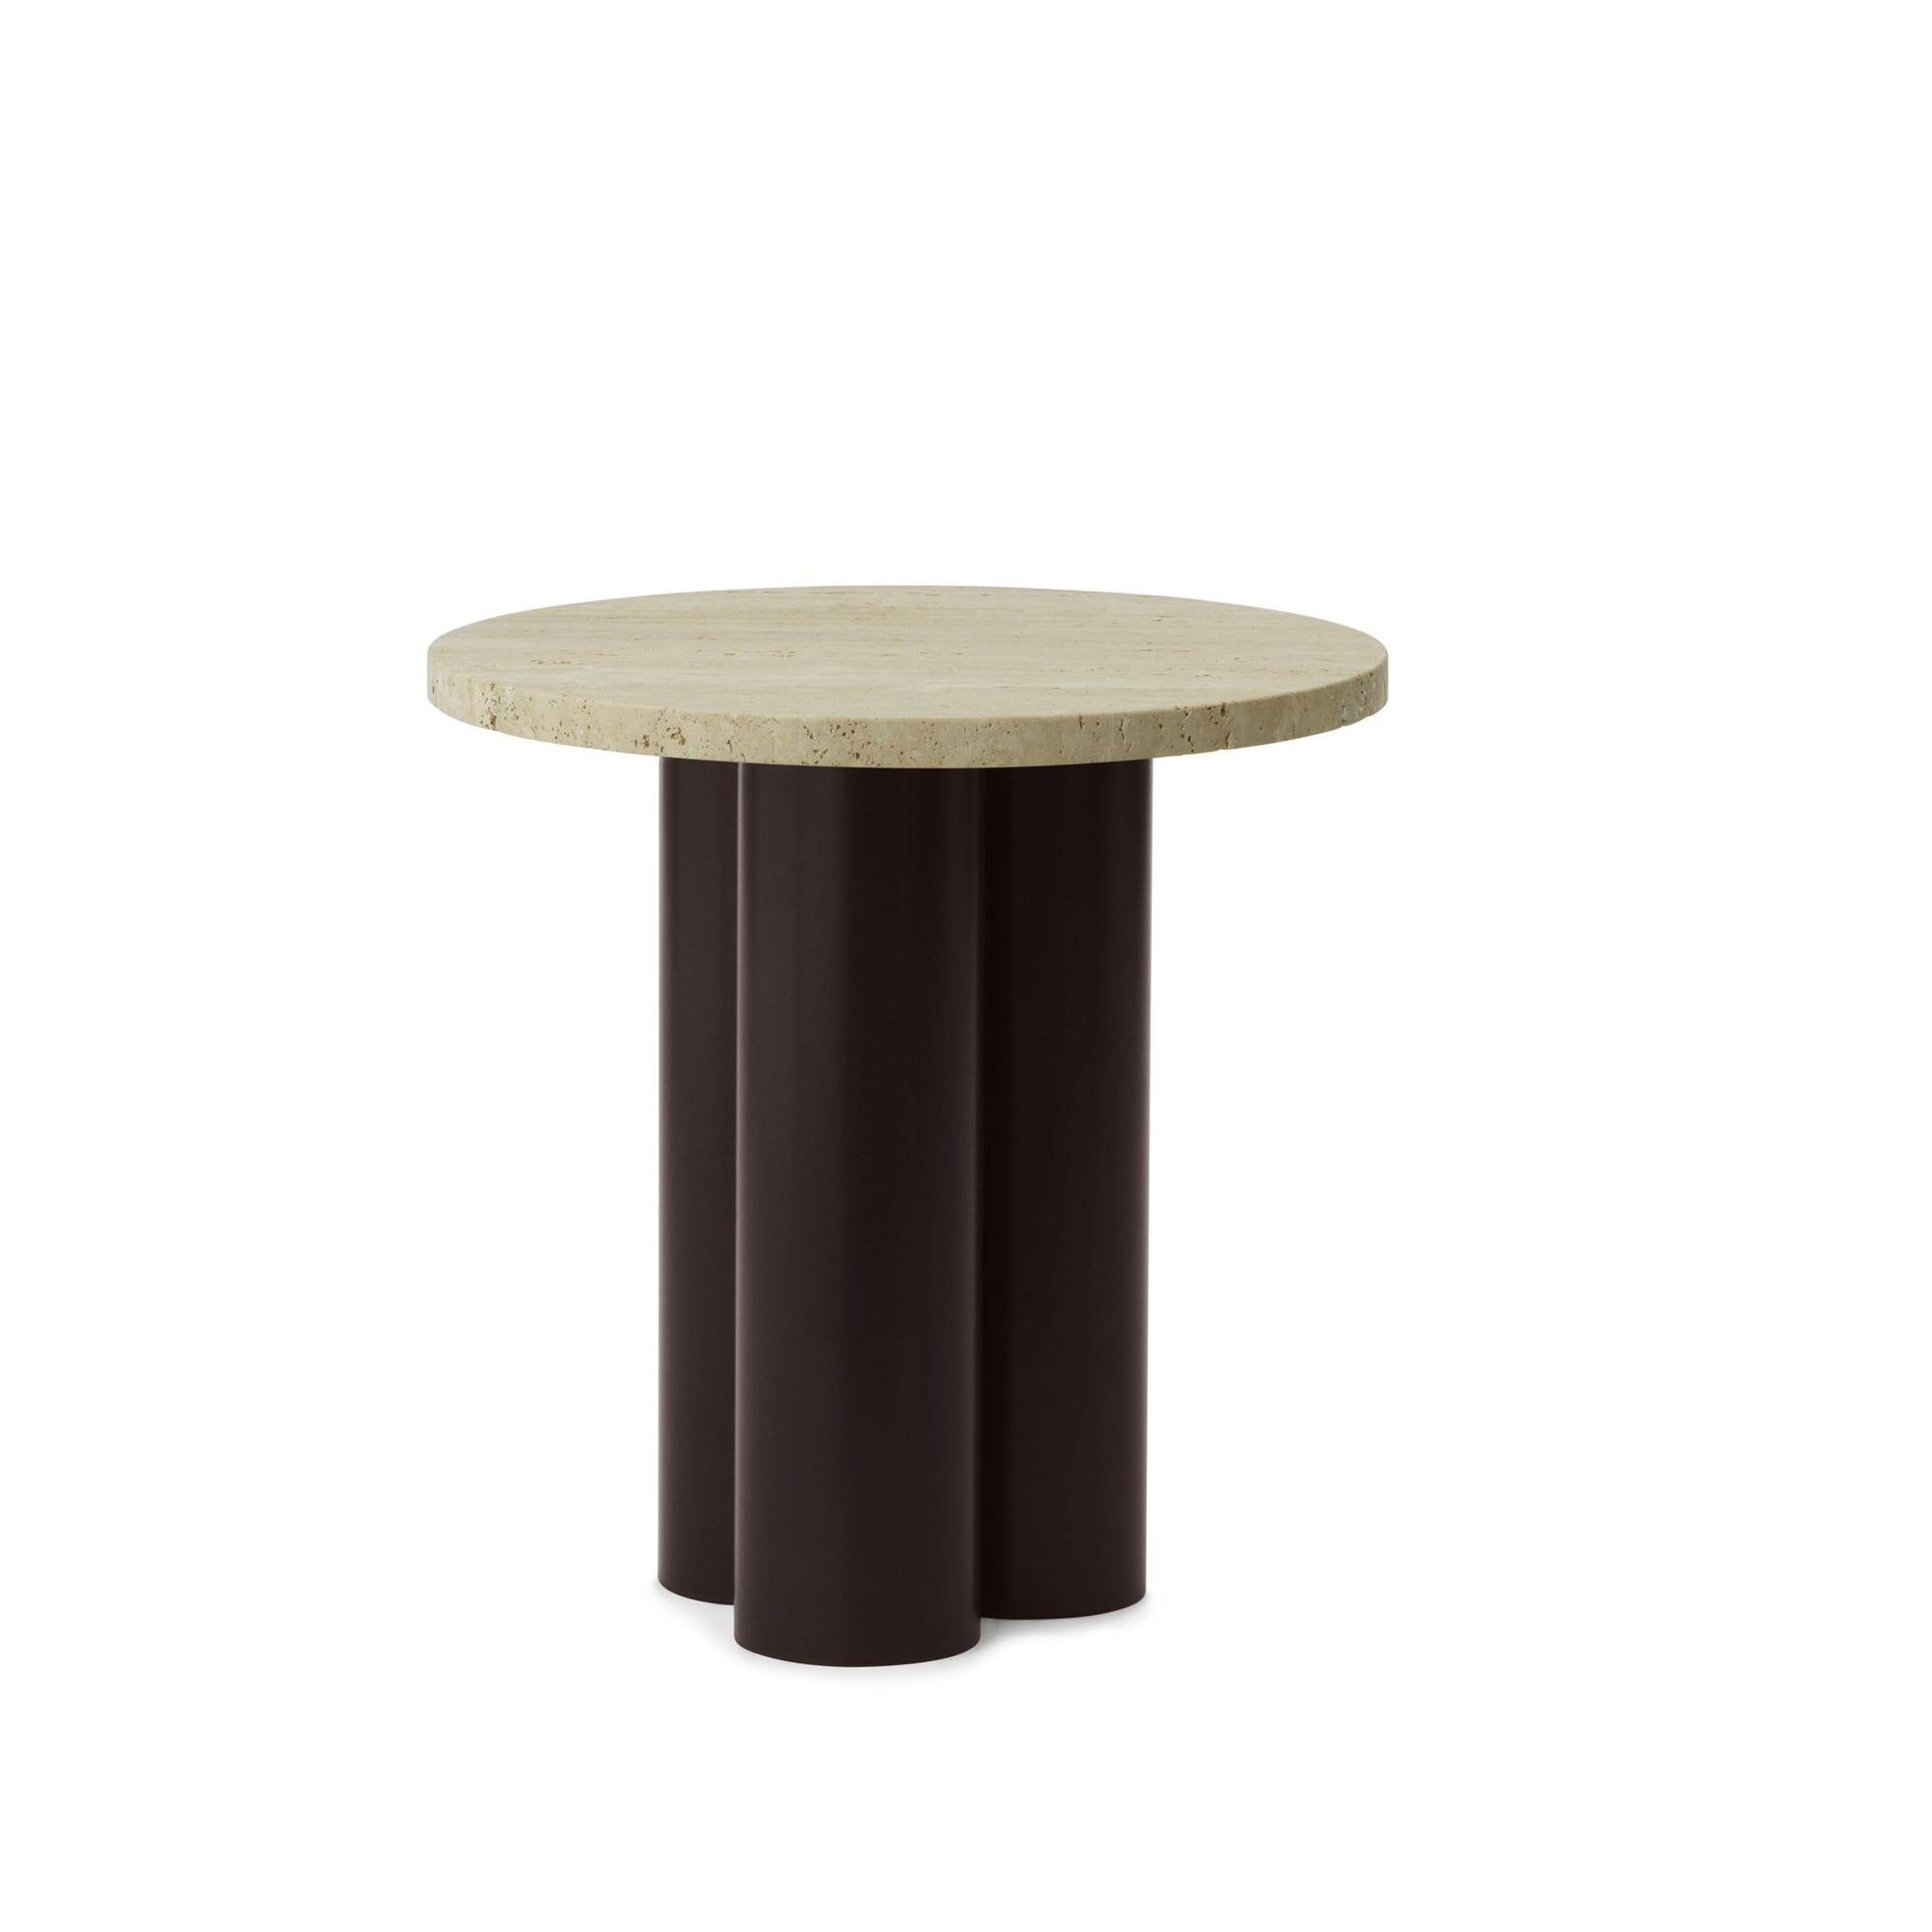 Your Side Table by Normann Copenhagen #Brown/ Travertine Light